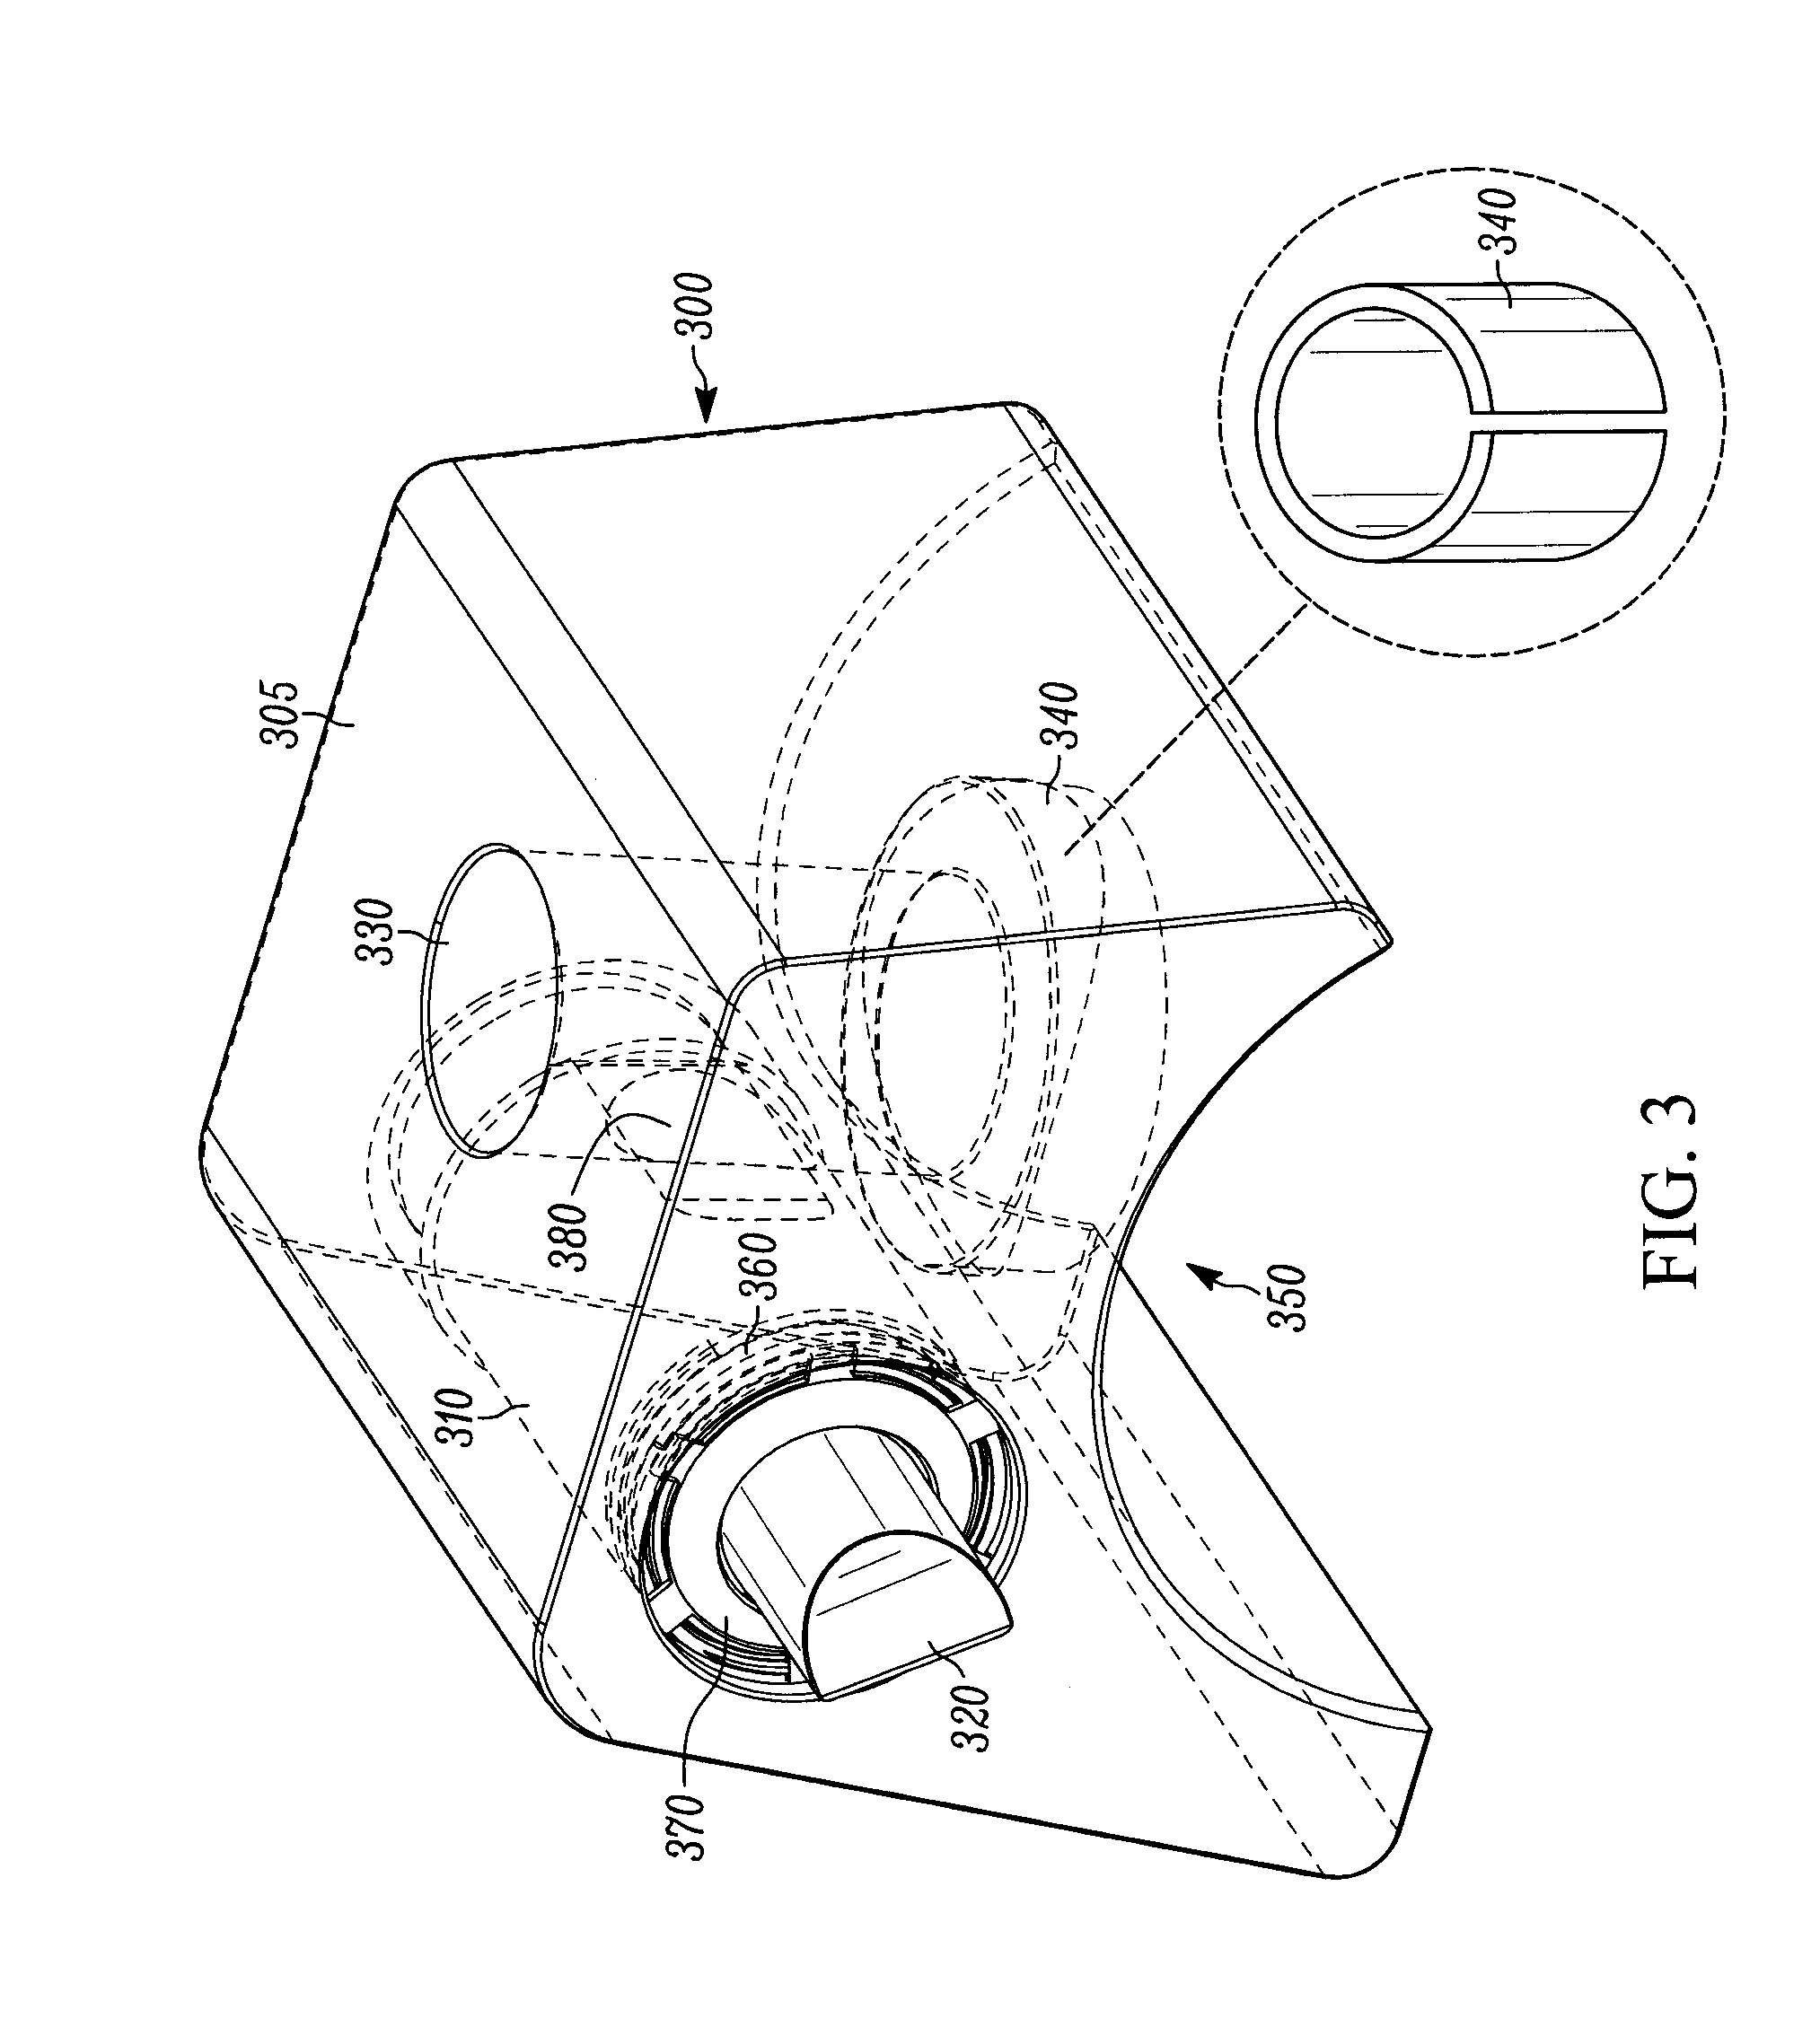 Rocker latch for controlling engine valve actuation